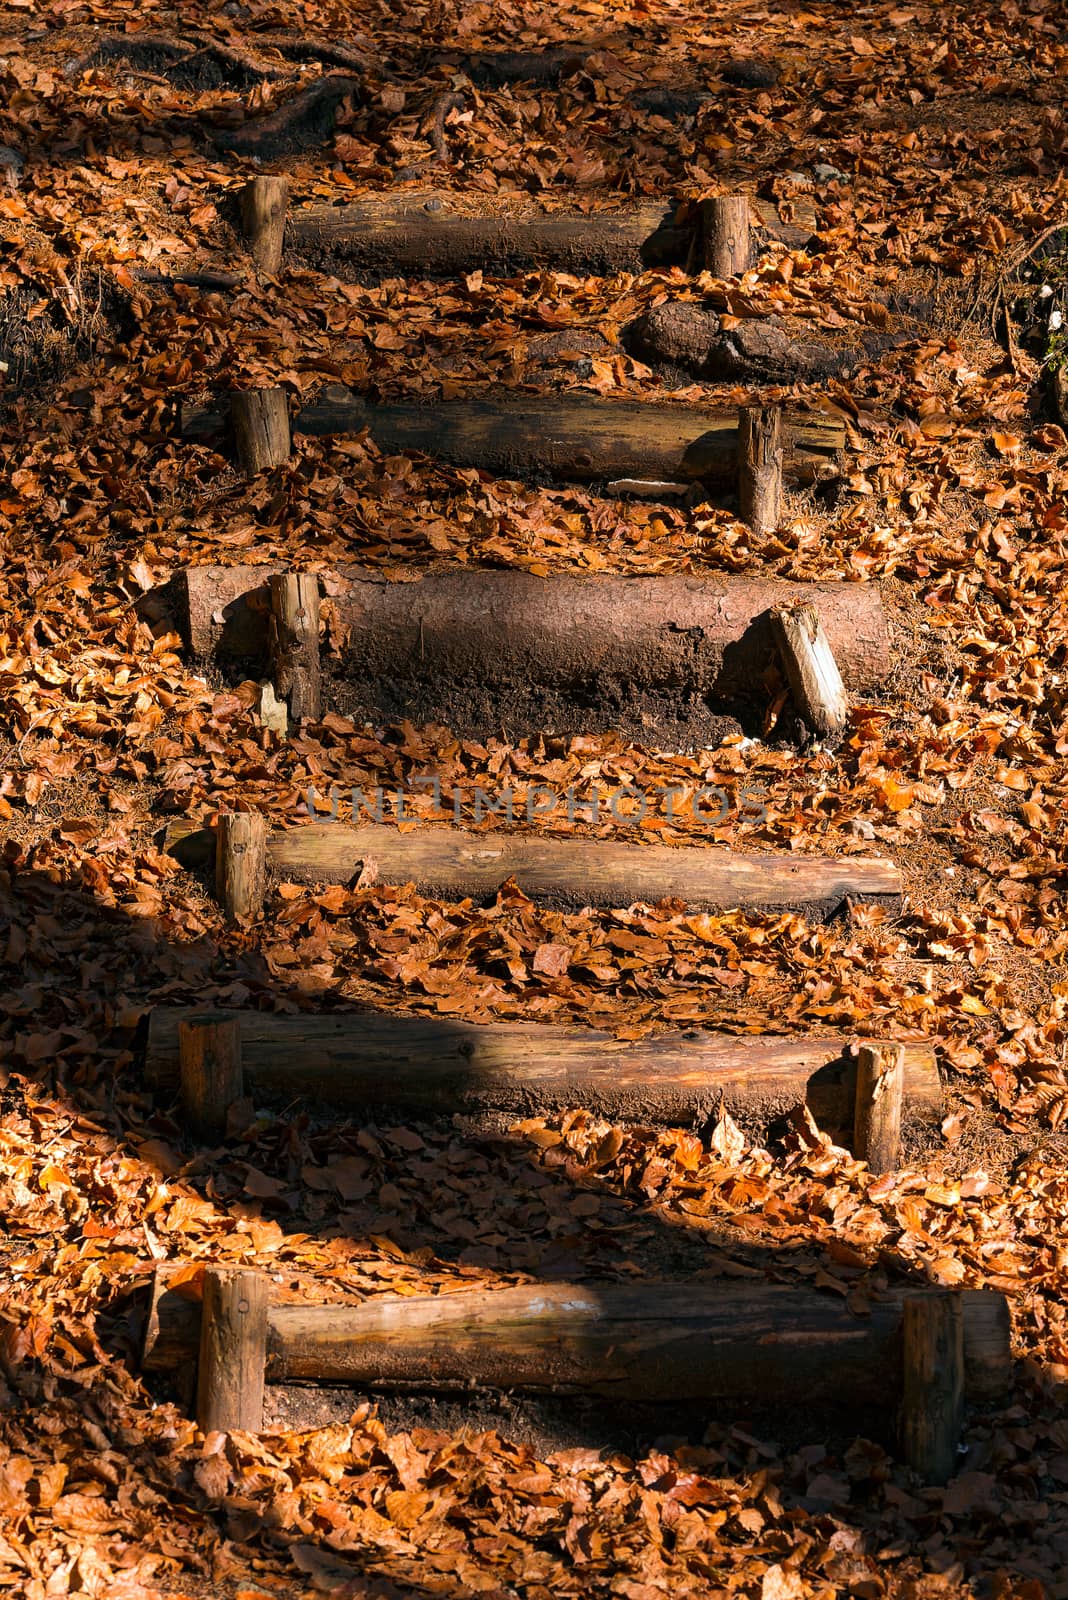 Staircase made of a tree trunks in a forest in autumn. Dry leaves on ground